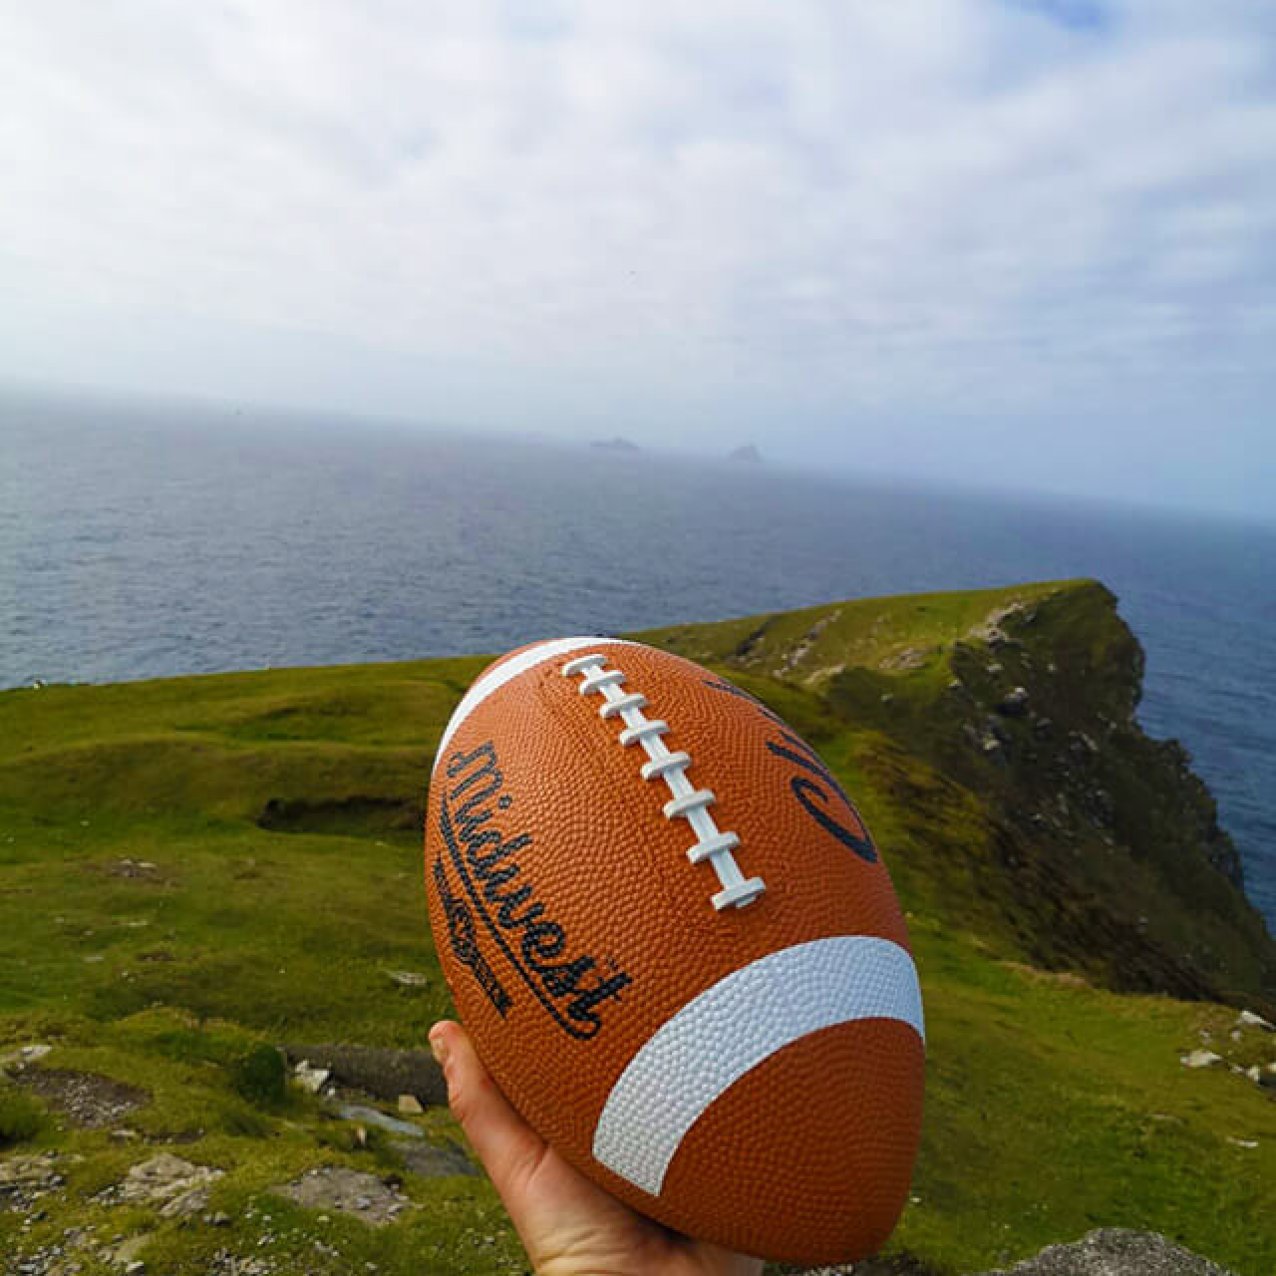 A hand holding an American football on Bray head with a view of the Skellig Islands in the background